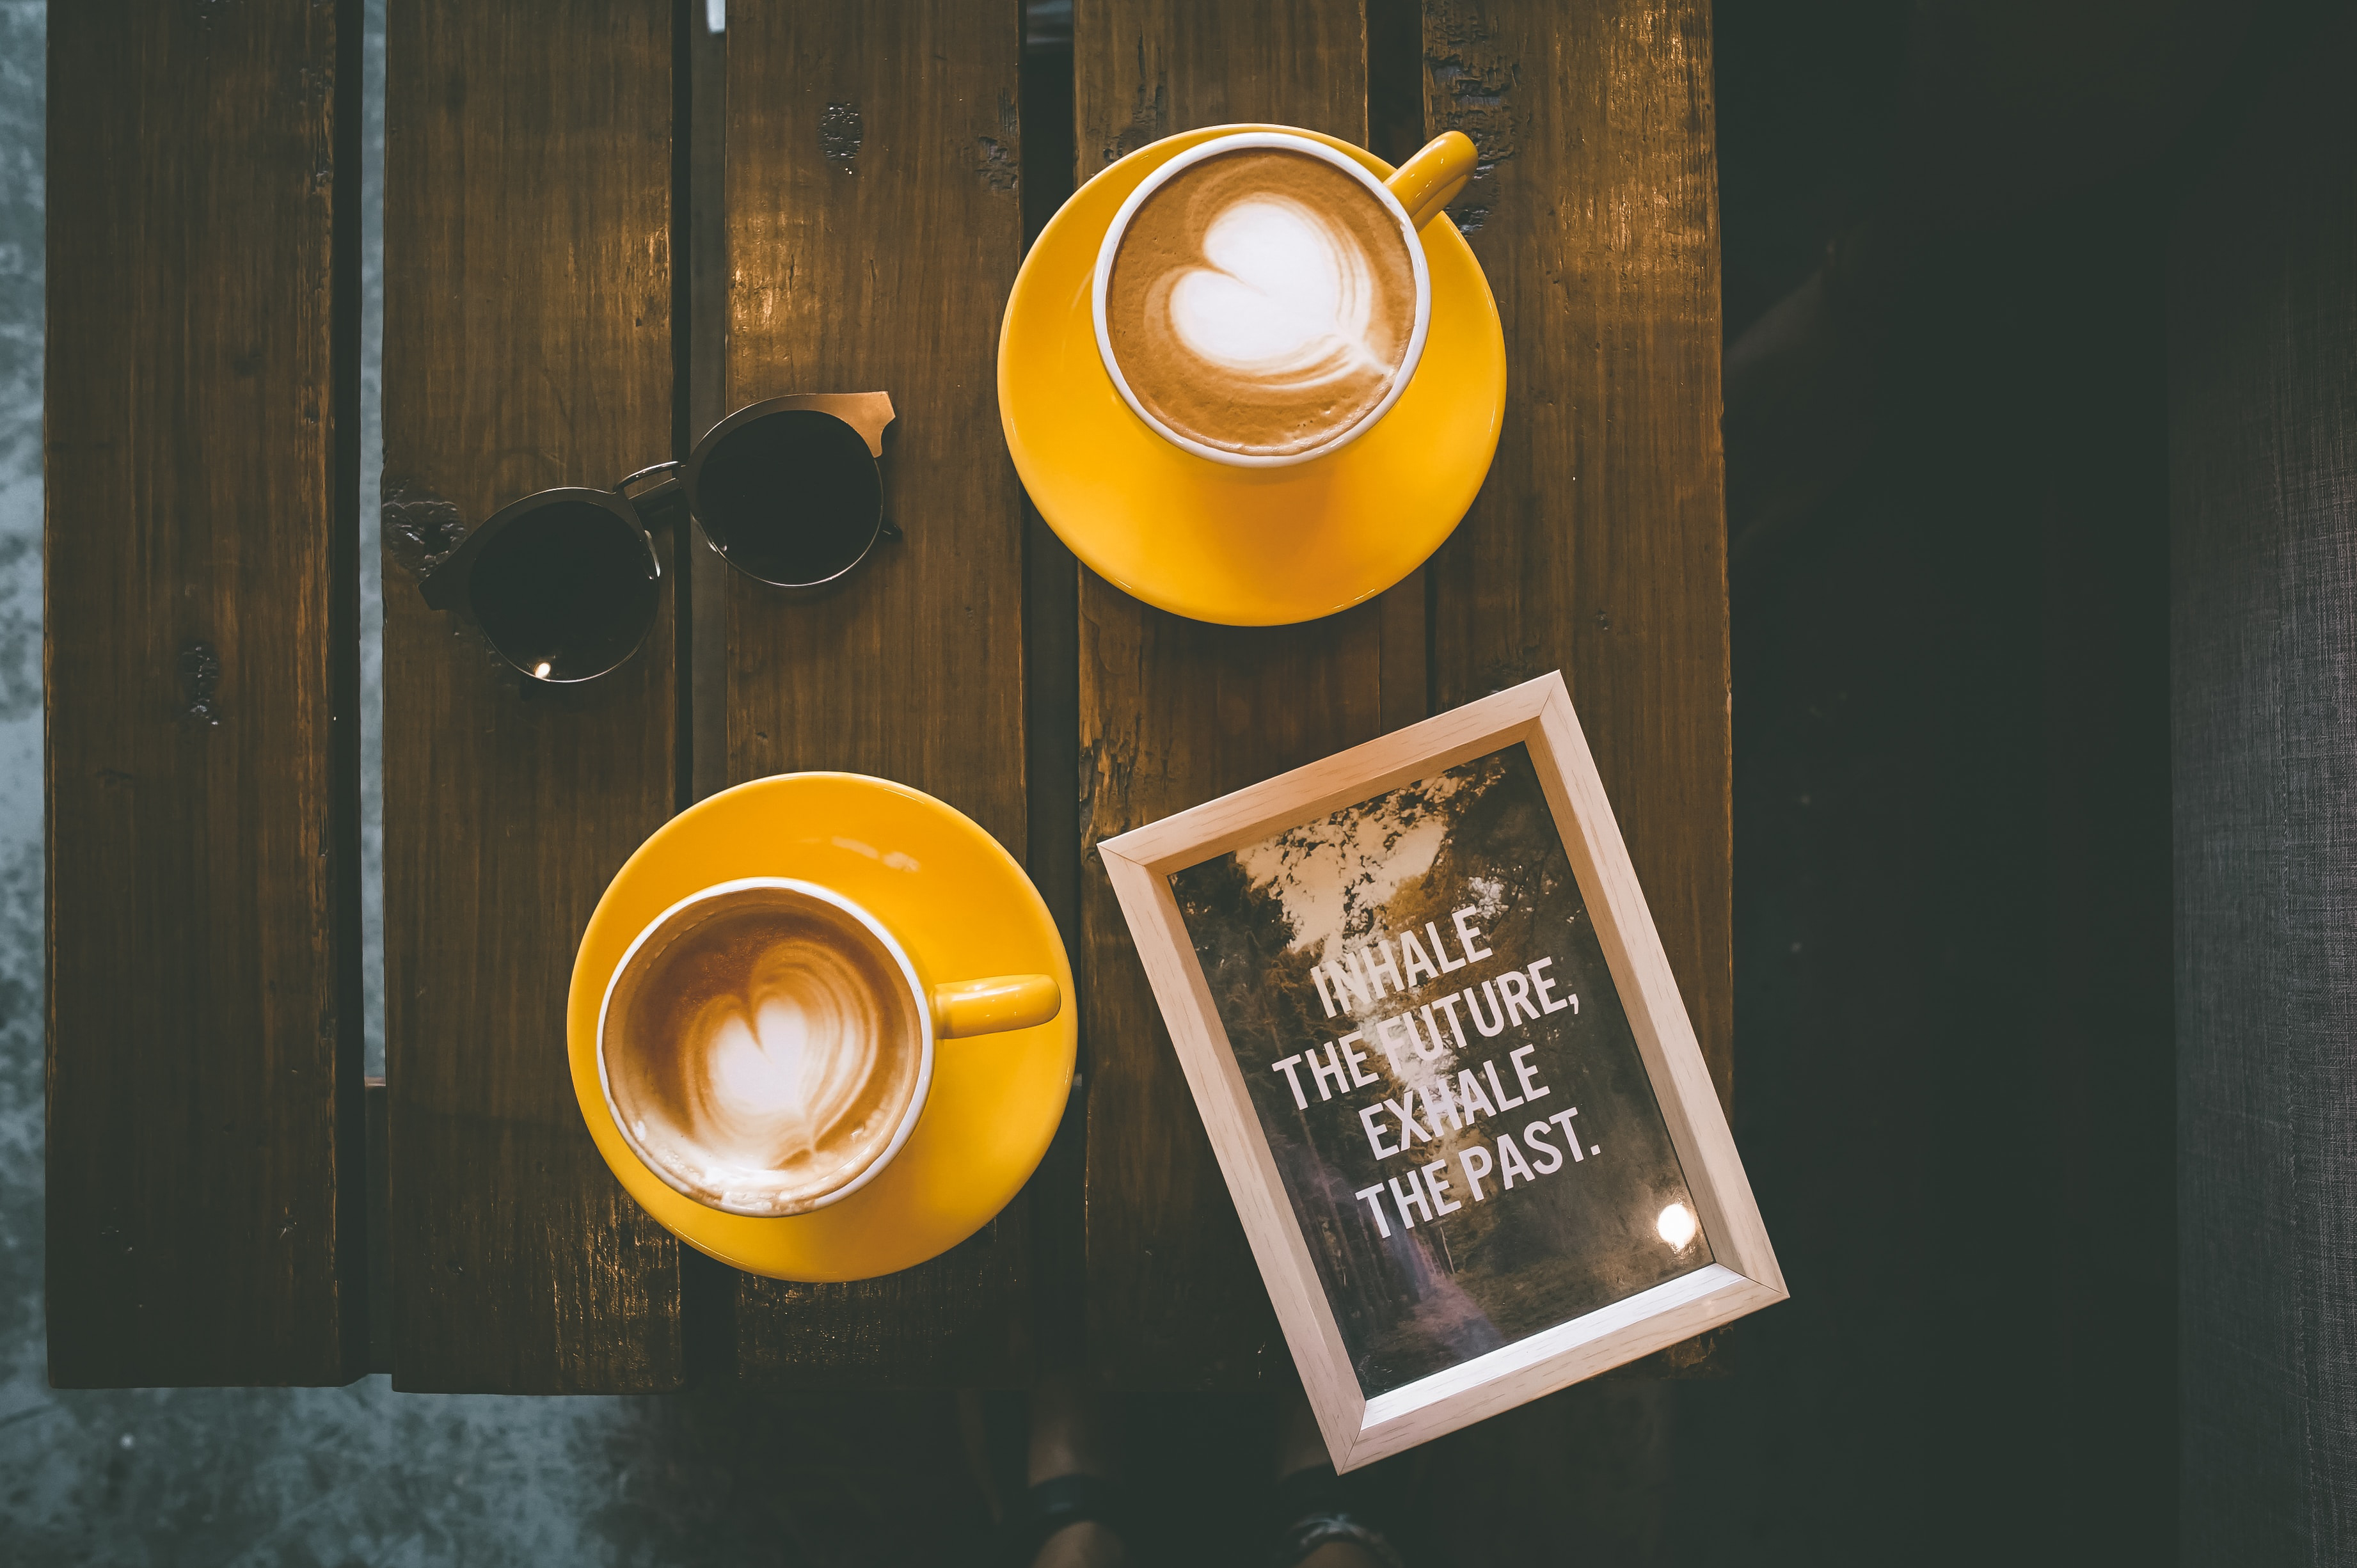 A photo from Cebu City, Philippines, showing two mugs containing cappuccinos on a table alongside a picture frame containing a quote with these words all in capital letters: 